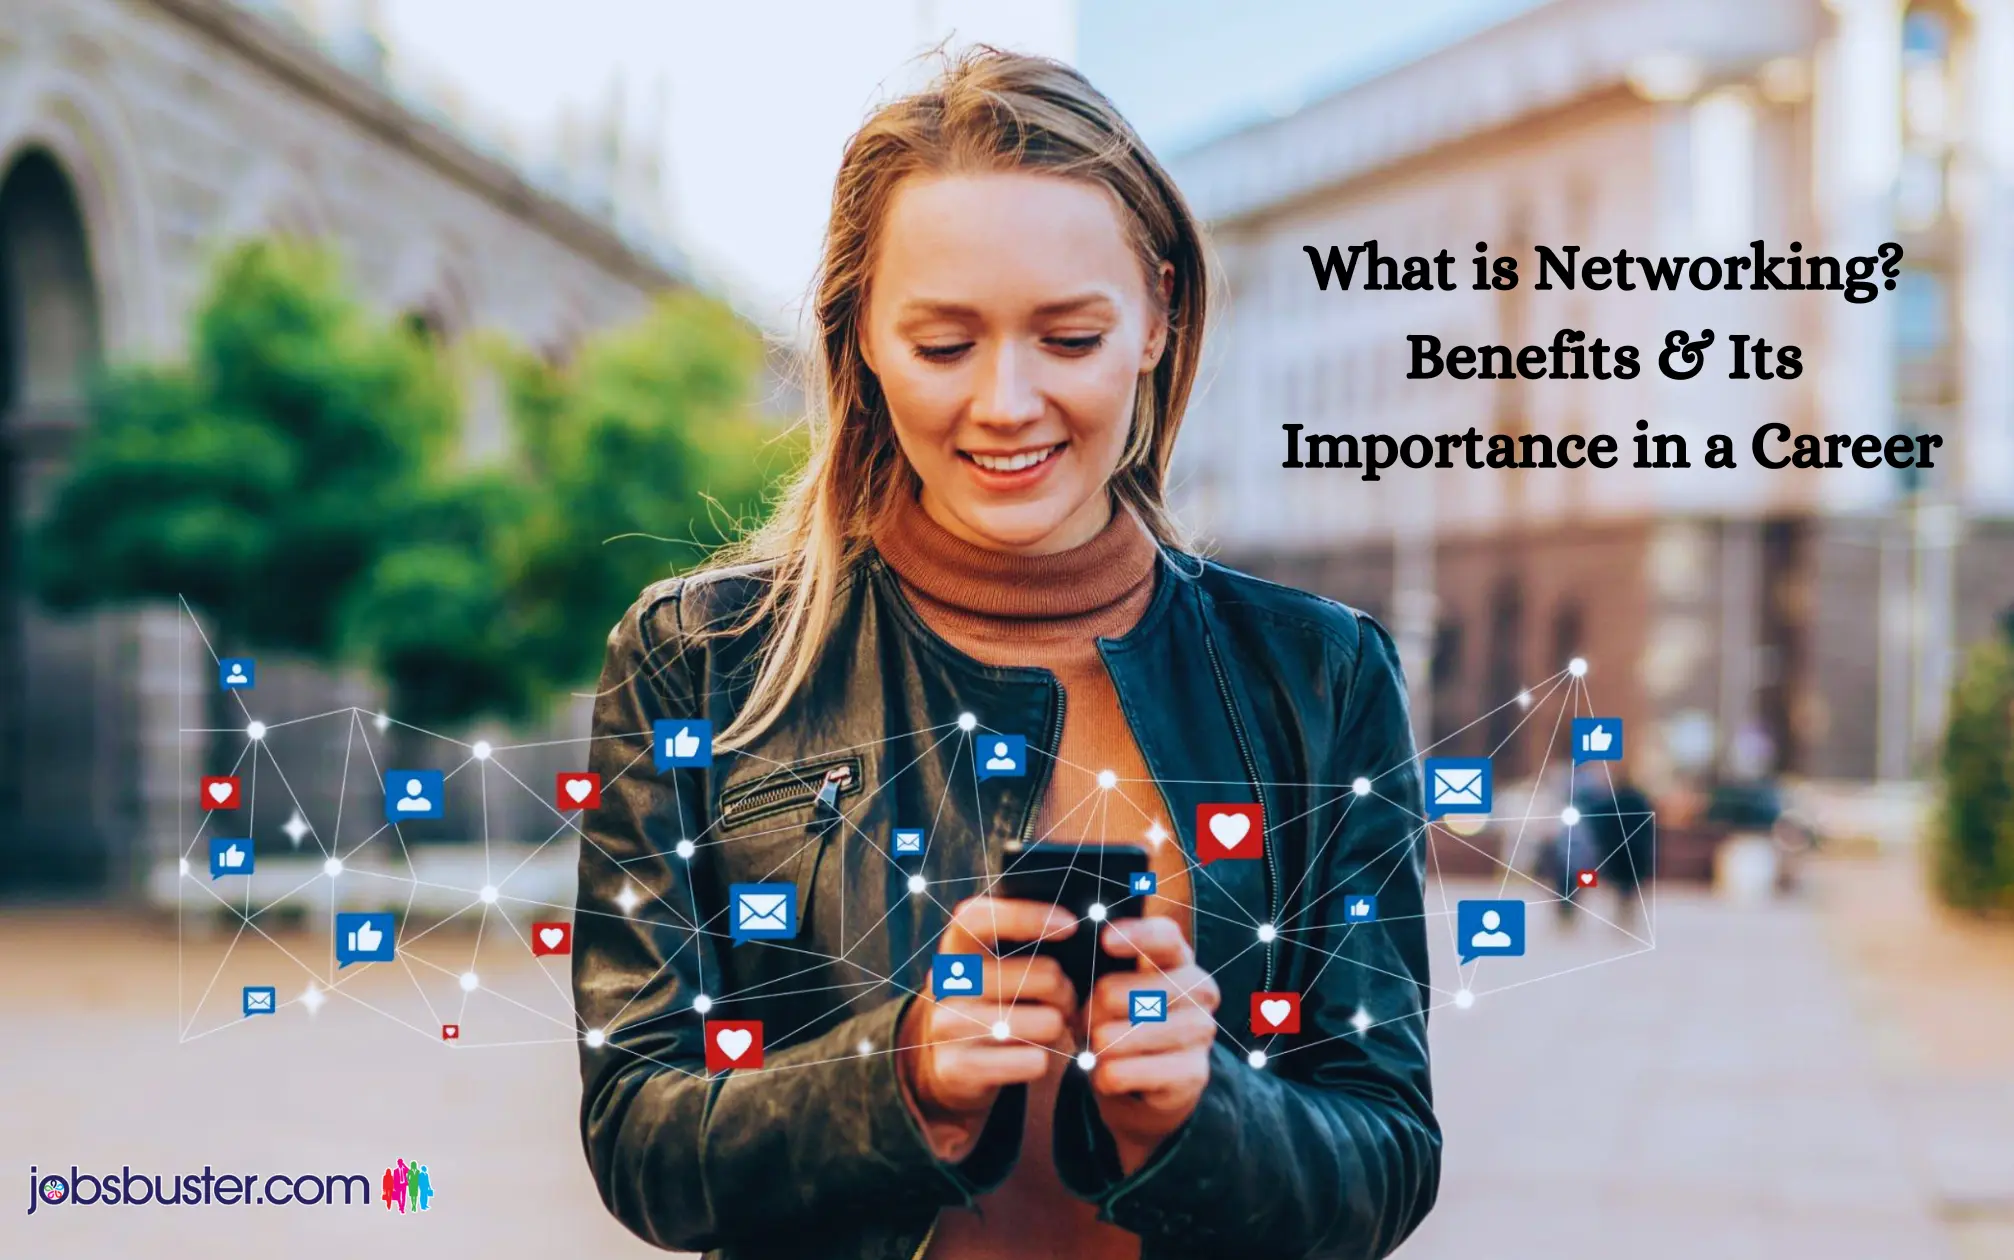 What is Networking? Benefits & Its Importance in a Career